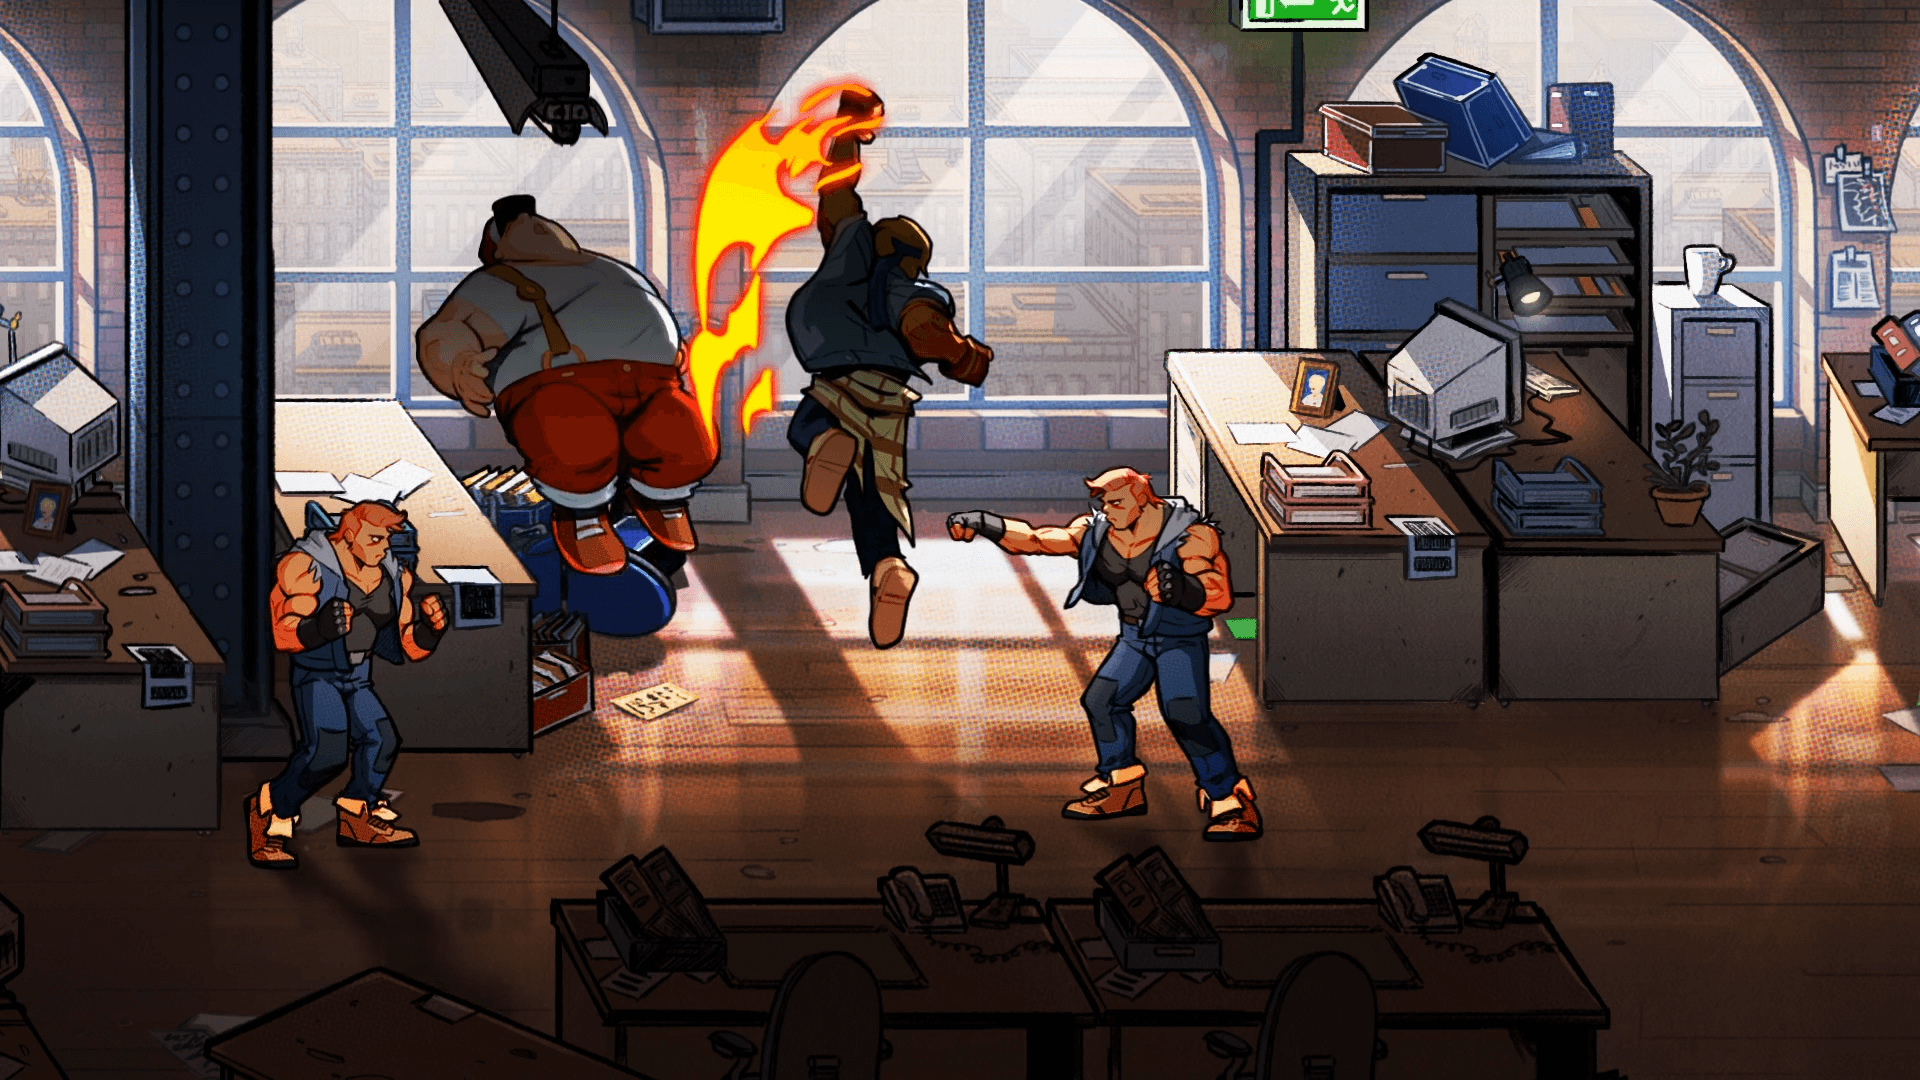 Streets of Rage 4: Preview, release date, news, trailers and more